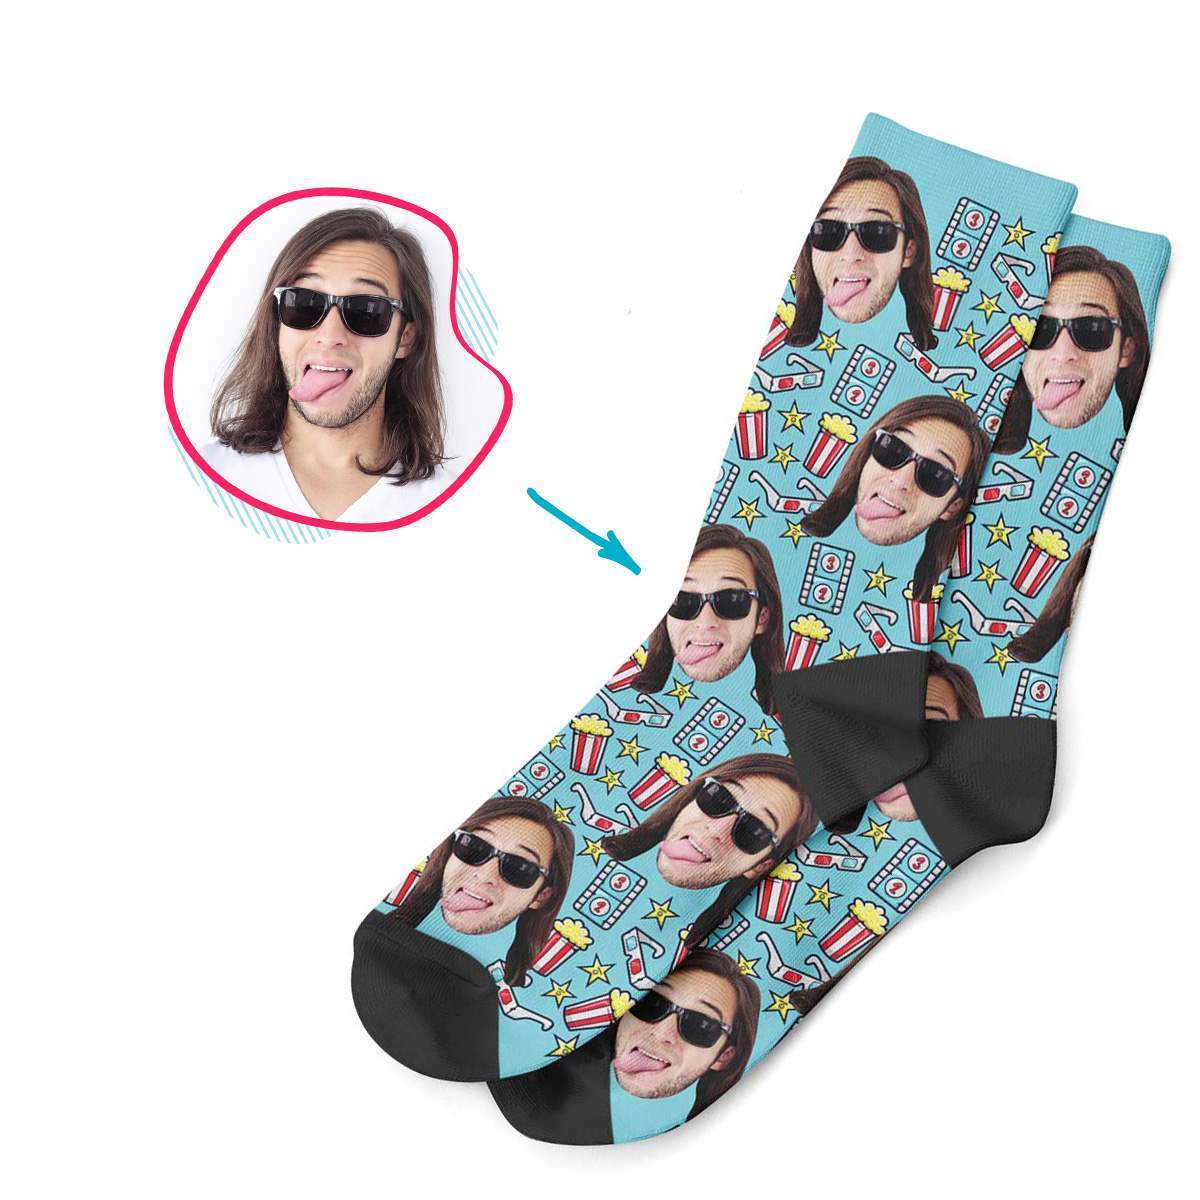 blue Movie socks personalized with photo of face printed on them